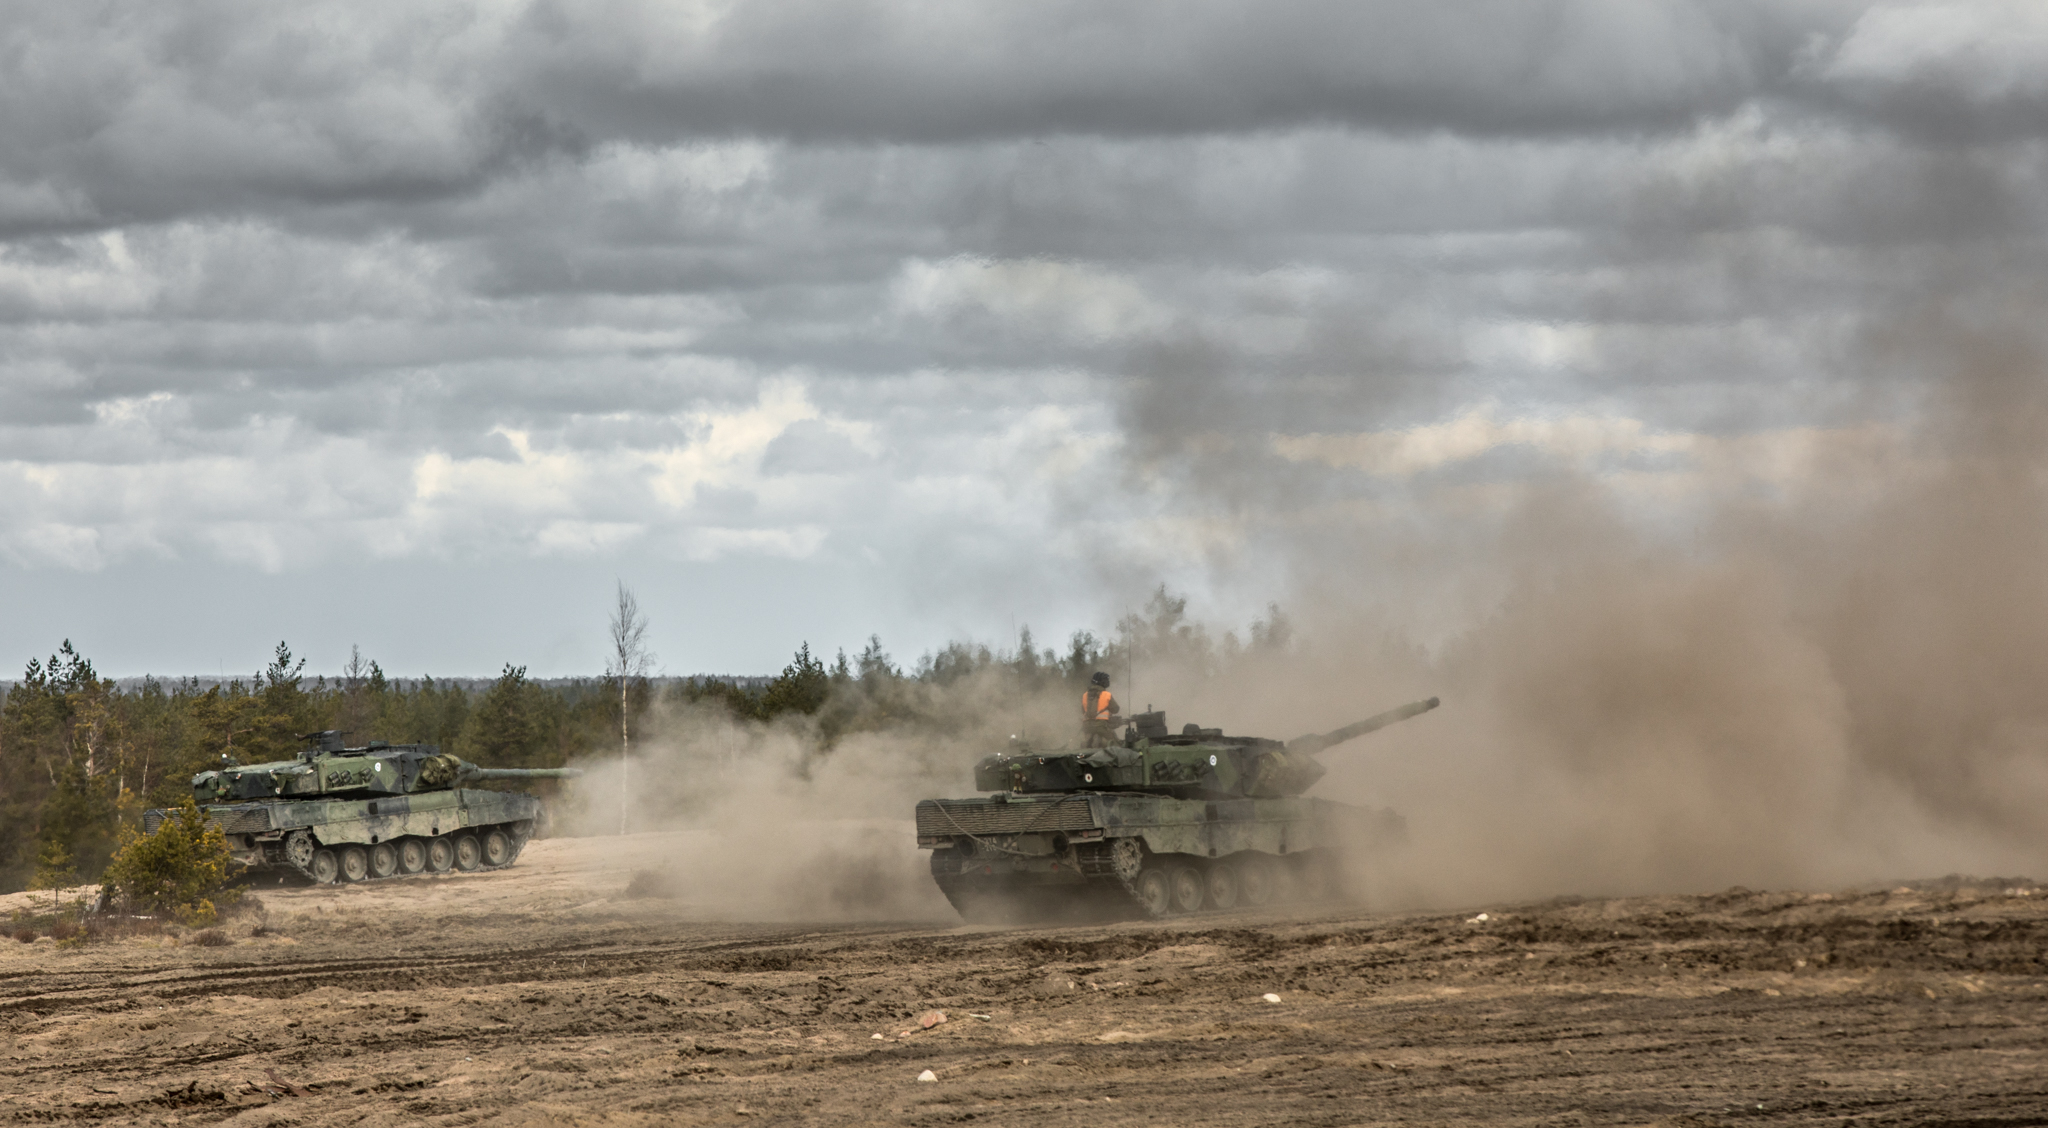 Leopard tanks shoot and there is smoke in the air